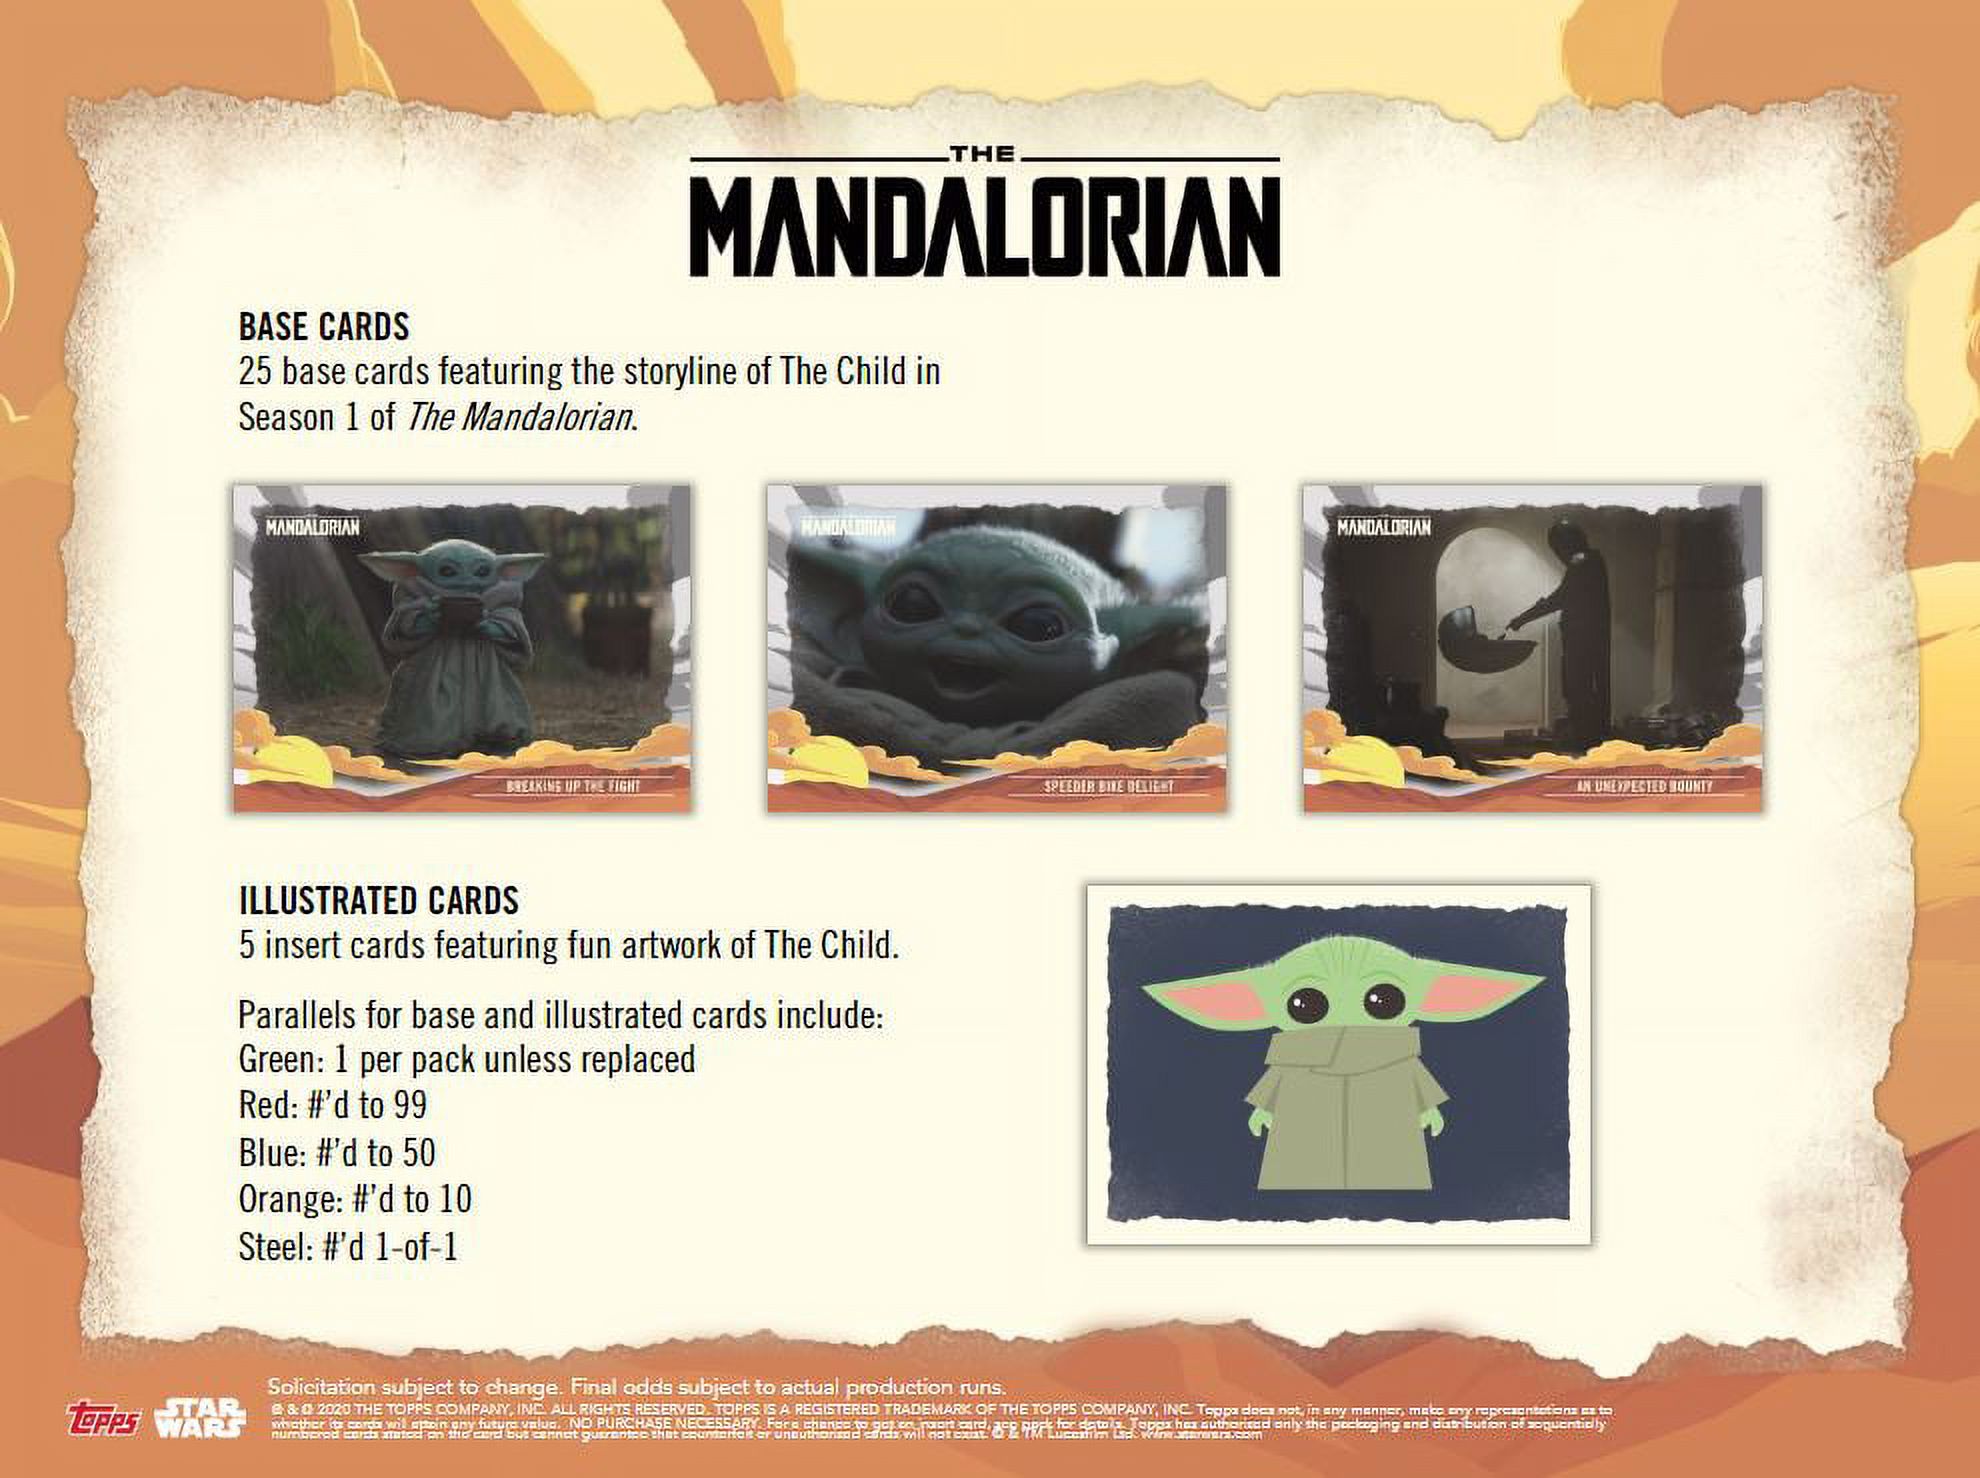 Topps the Mandalorian: Journey of the Child Star Wars Trading Cards Blaster Box- Featuring Baby Yoda - image 2 of 3